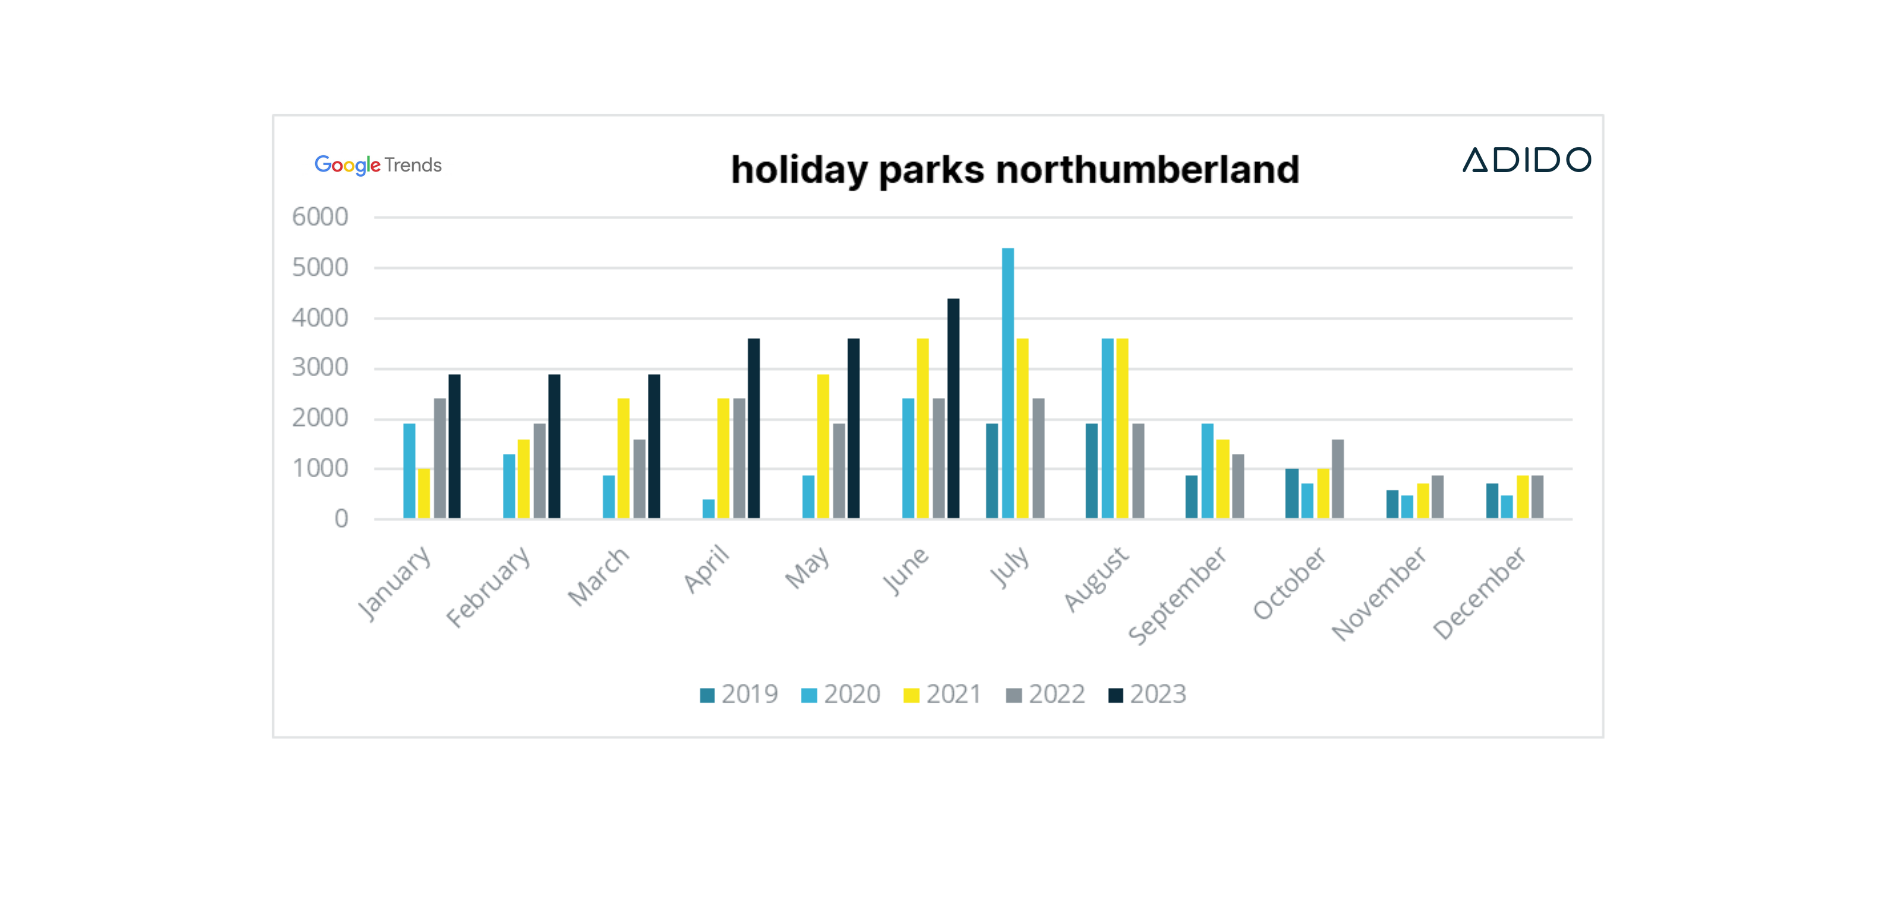 Holiday parks northumberland search trend 2019 2023